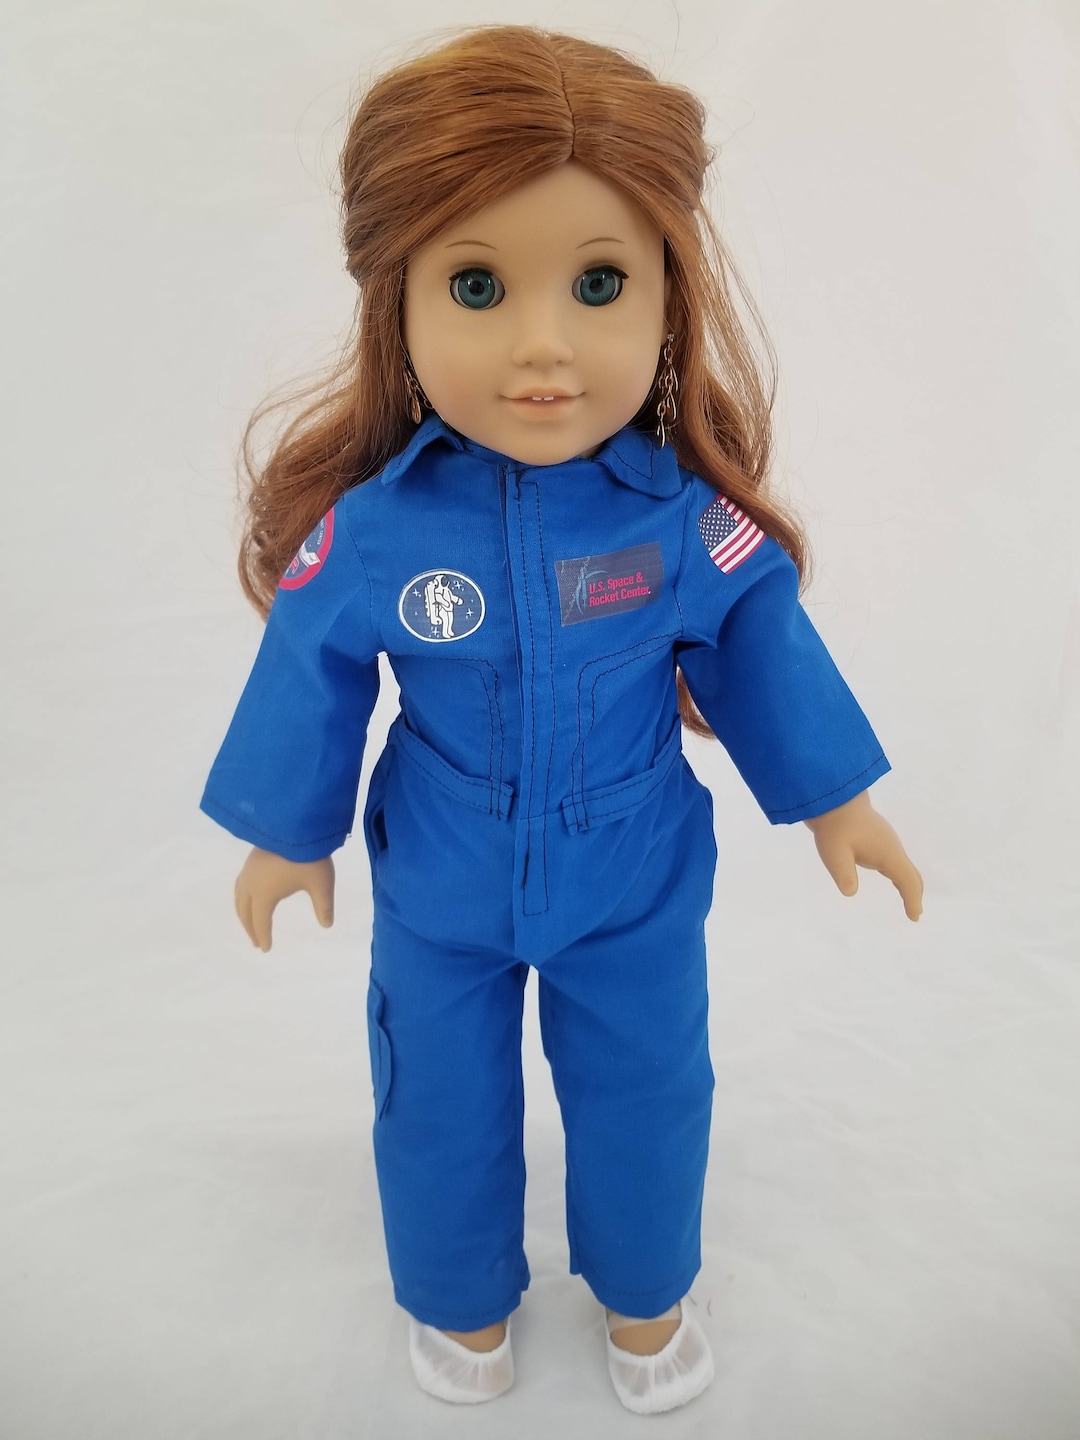 Space Flight Suit for 18 Inch Doll - Etsy